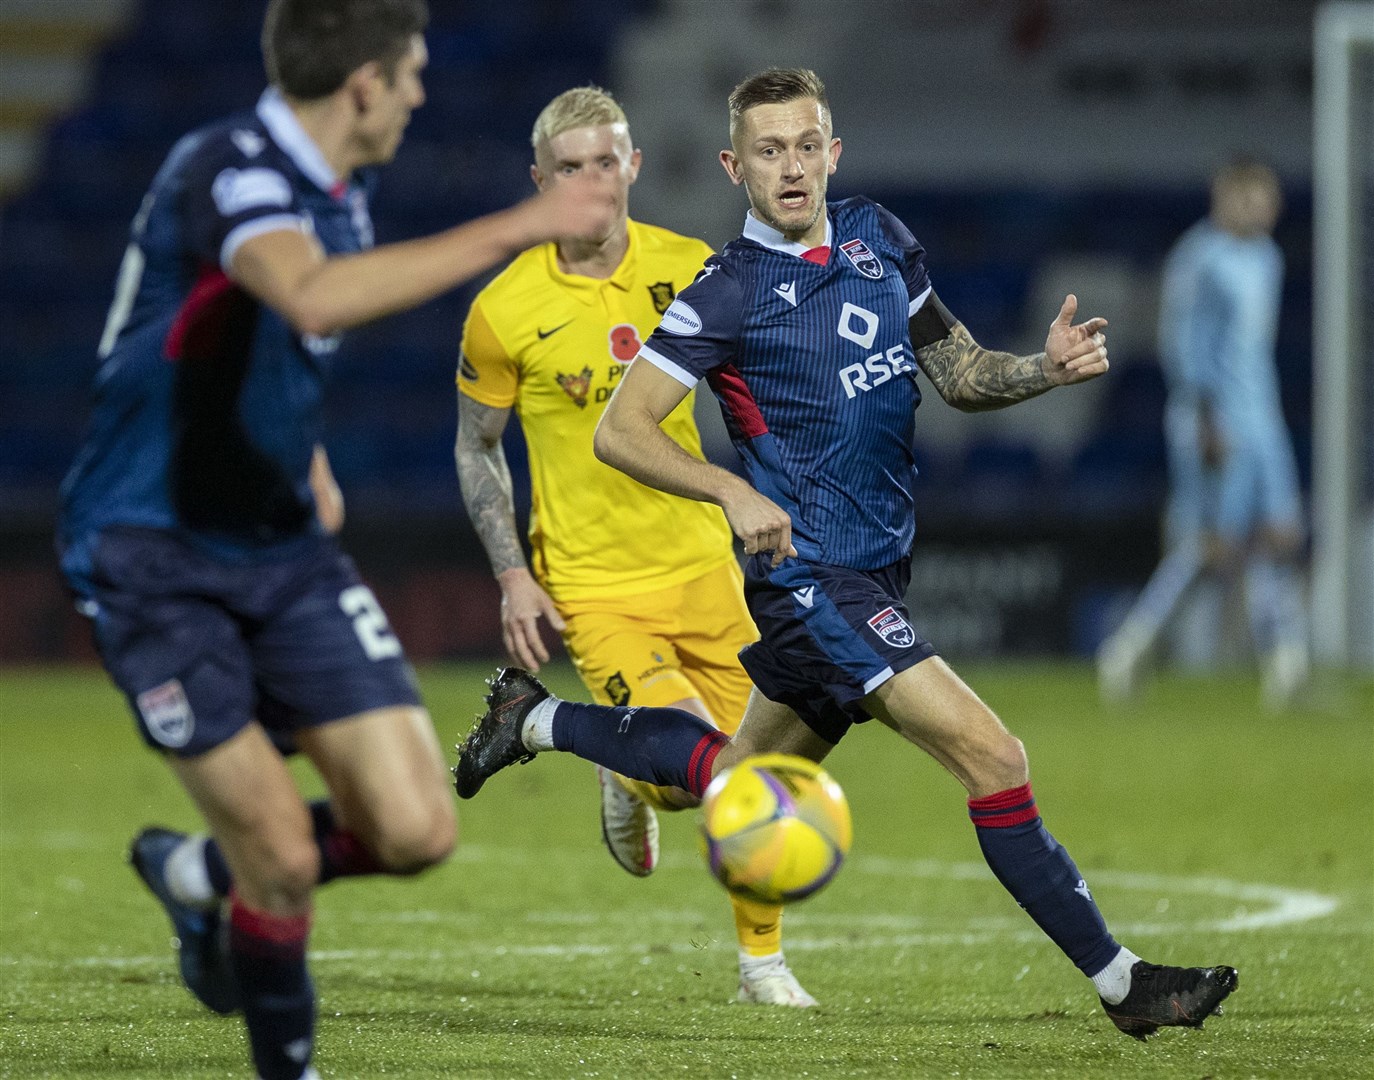 Charlie Lakin has shown early signs that he could be an important player for Ross County.